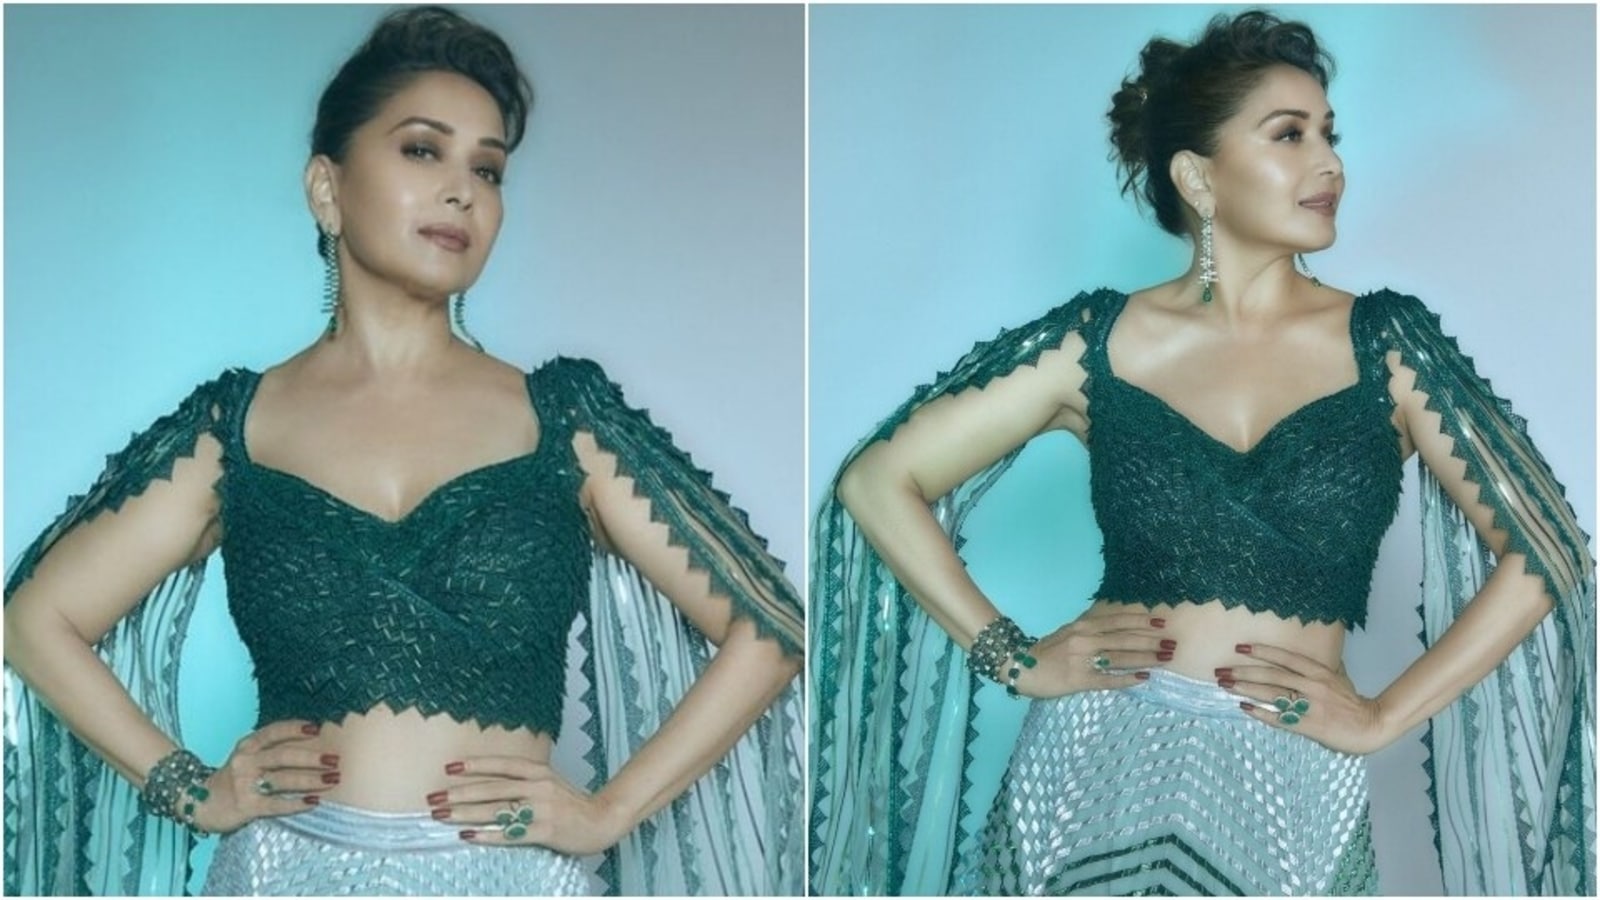 Madhuri Dixit Ka Sexy Picture - Madhuri Dixit in â‚¹2 lakh futuristic-traditional lehenga is back in action  and how | Fashion Trends - Hindustan Times